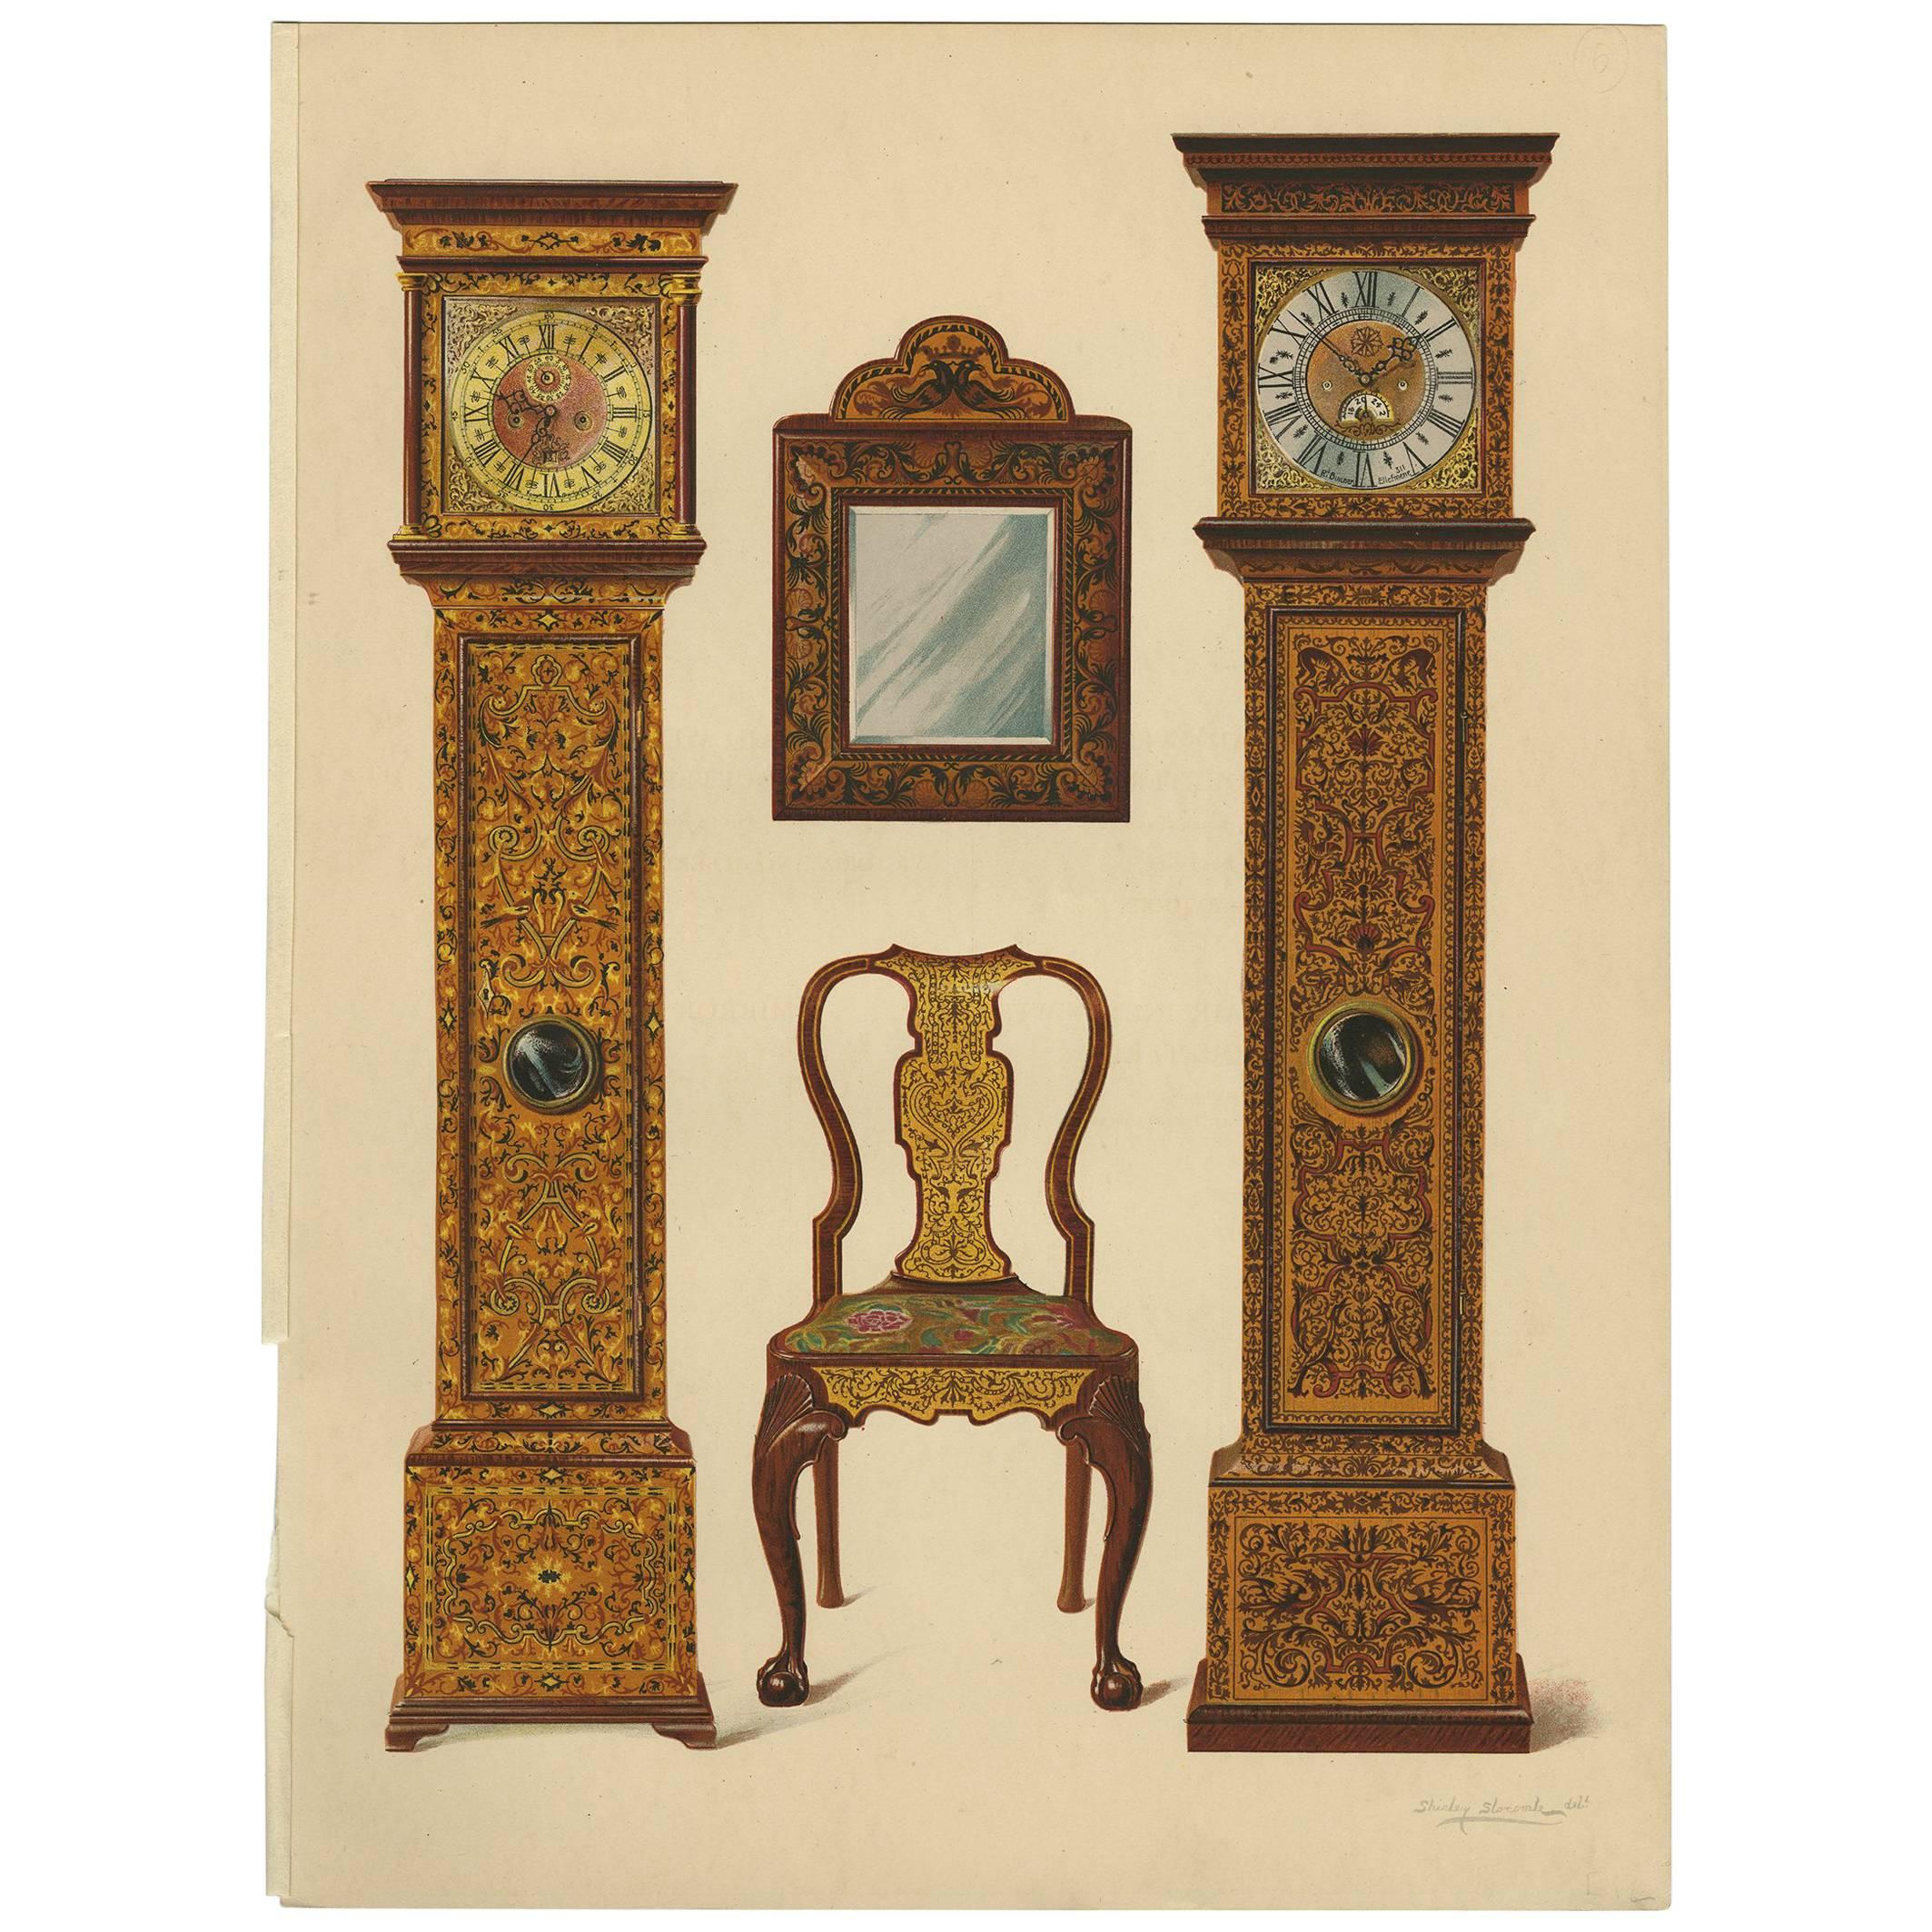 Antique Print of English Furniture 'Clocks, Mirror, Chair' by P. Macquoid, 1906